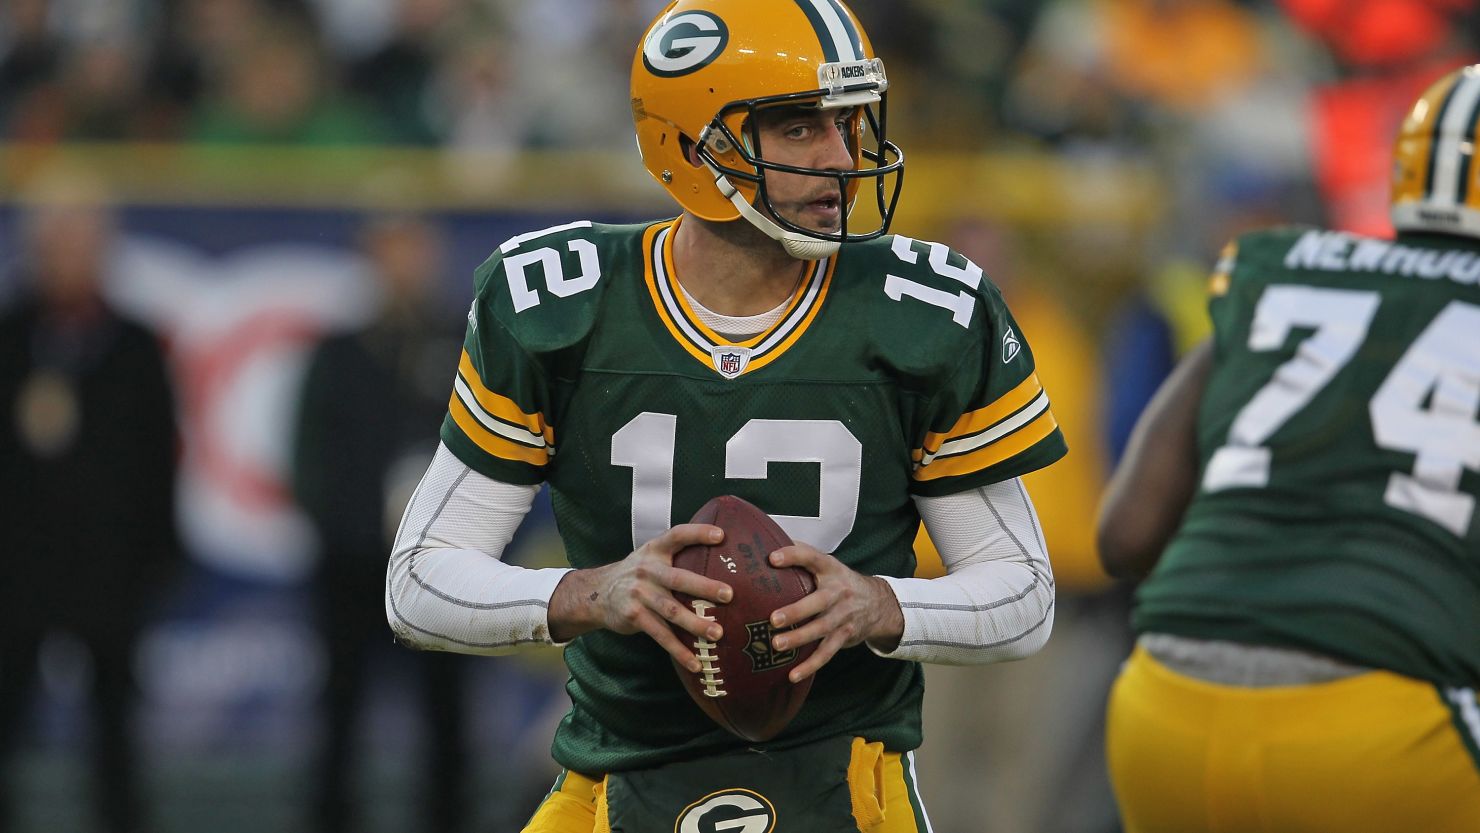 Quarterback Aaron Rodgers leads the Green Bay Packers, considered a favorite to reach the Super Bowl.